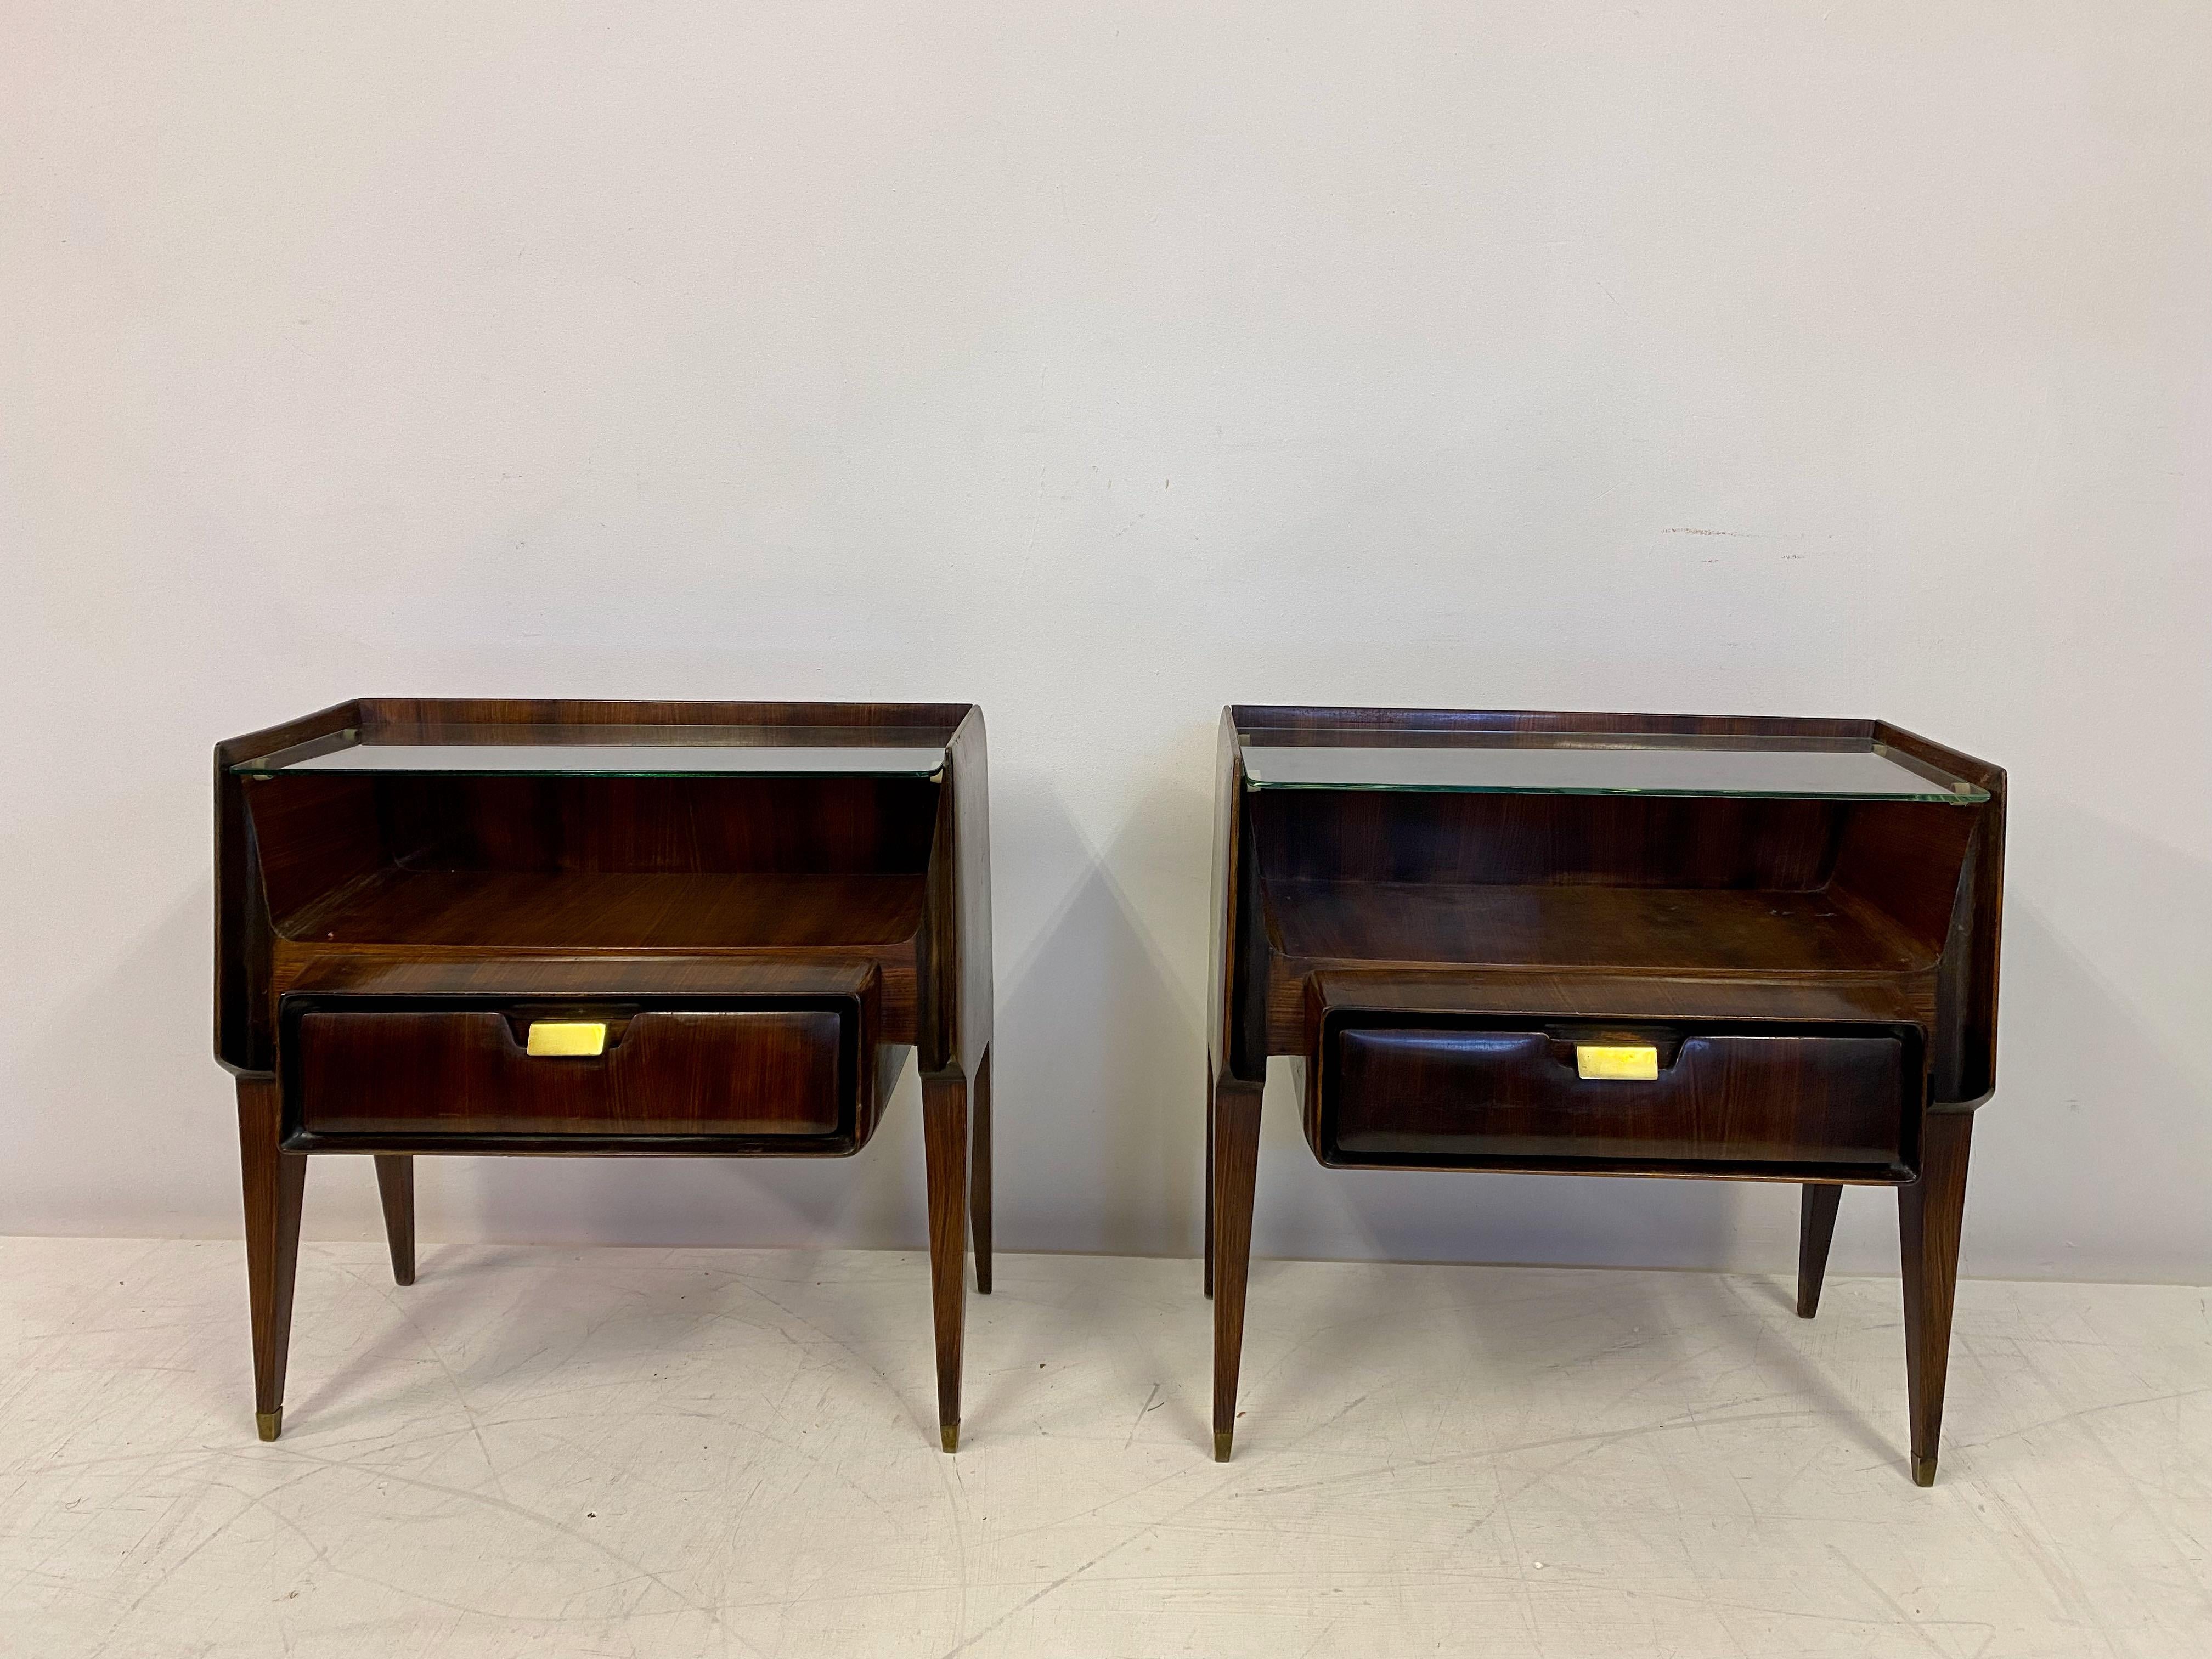 Pair of bedside tables

Rosewood frame

Glass top shelf

Brass feet and handles

Price includes refinishing

1960s Italian.